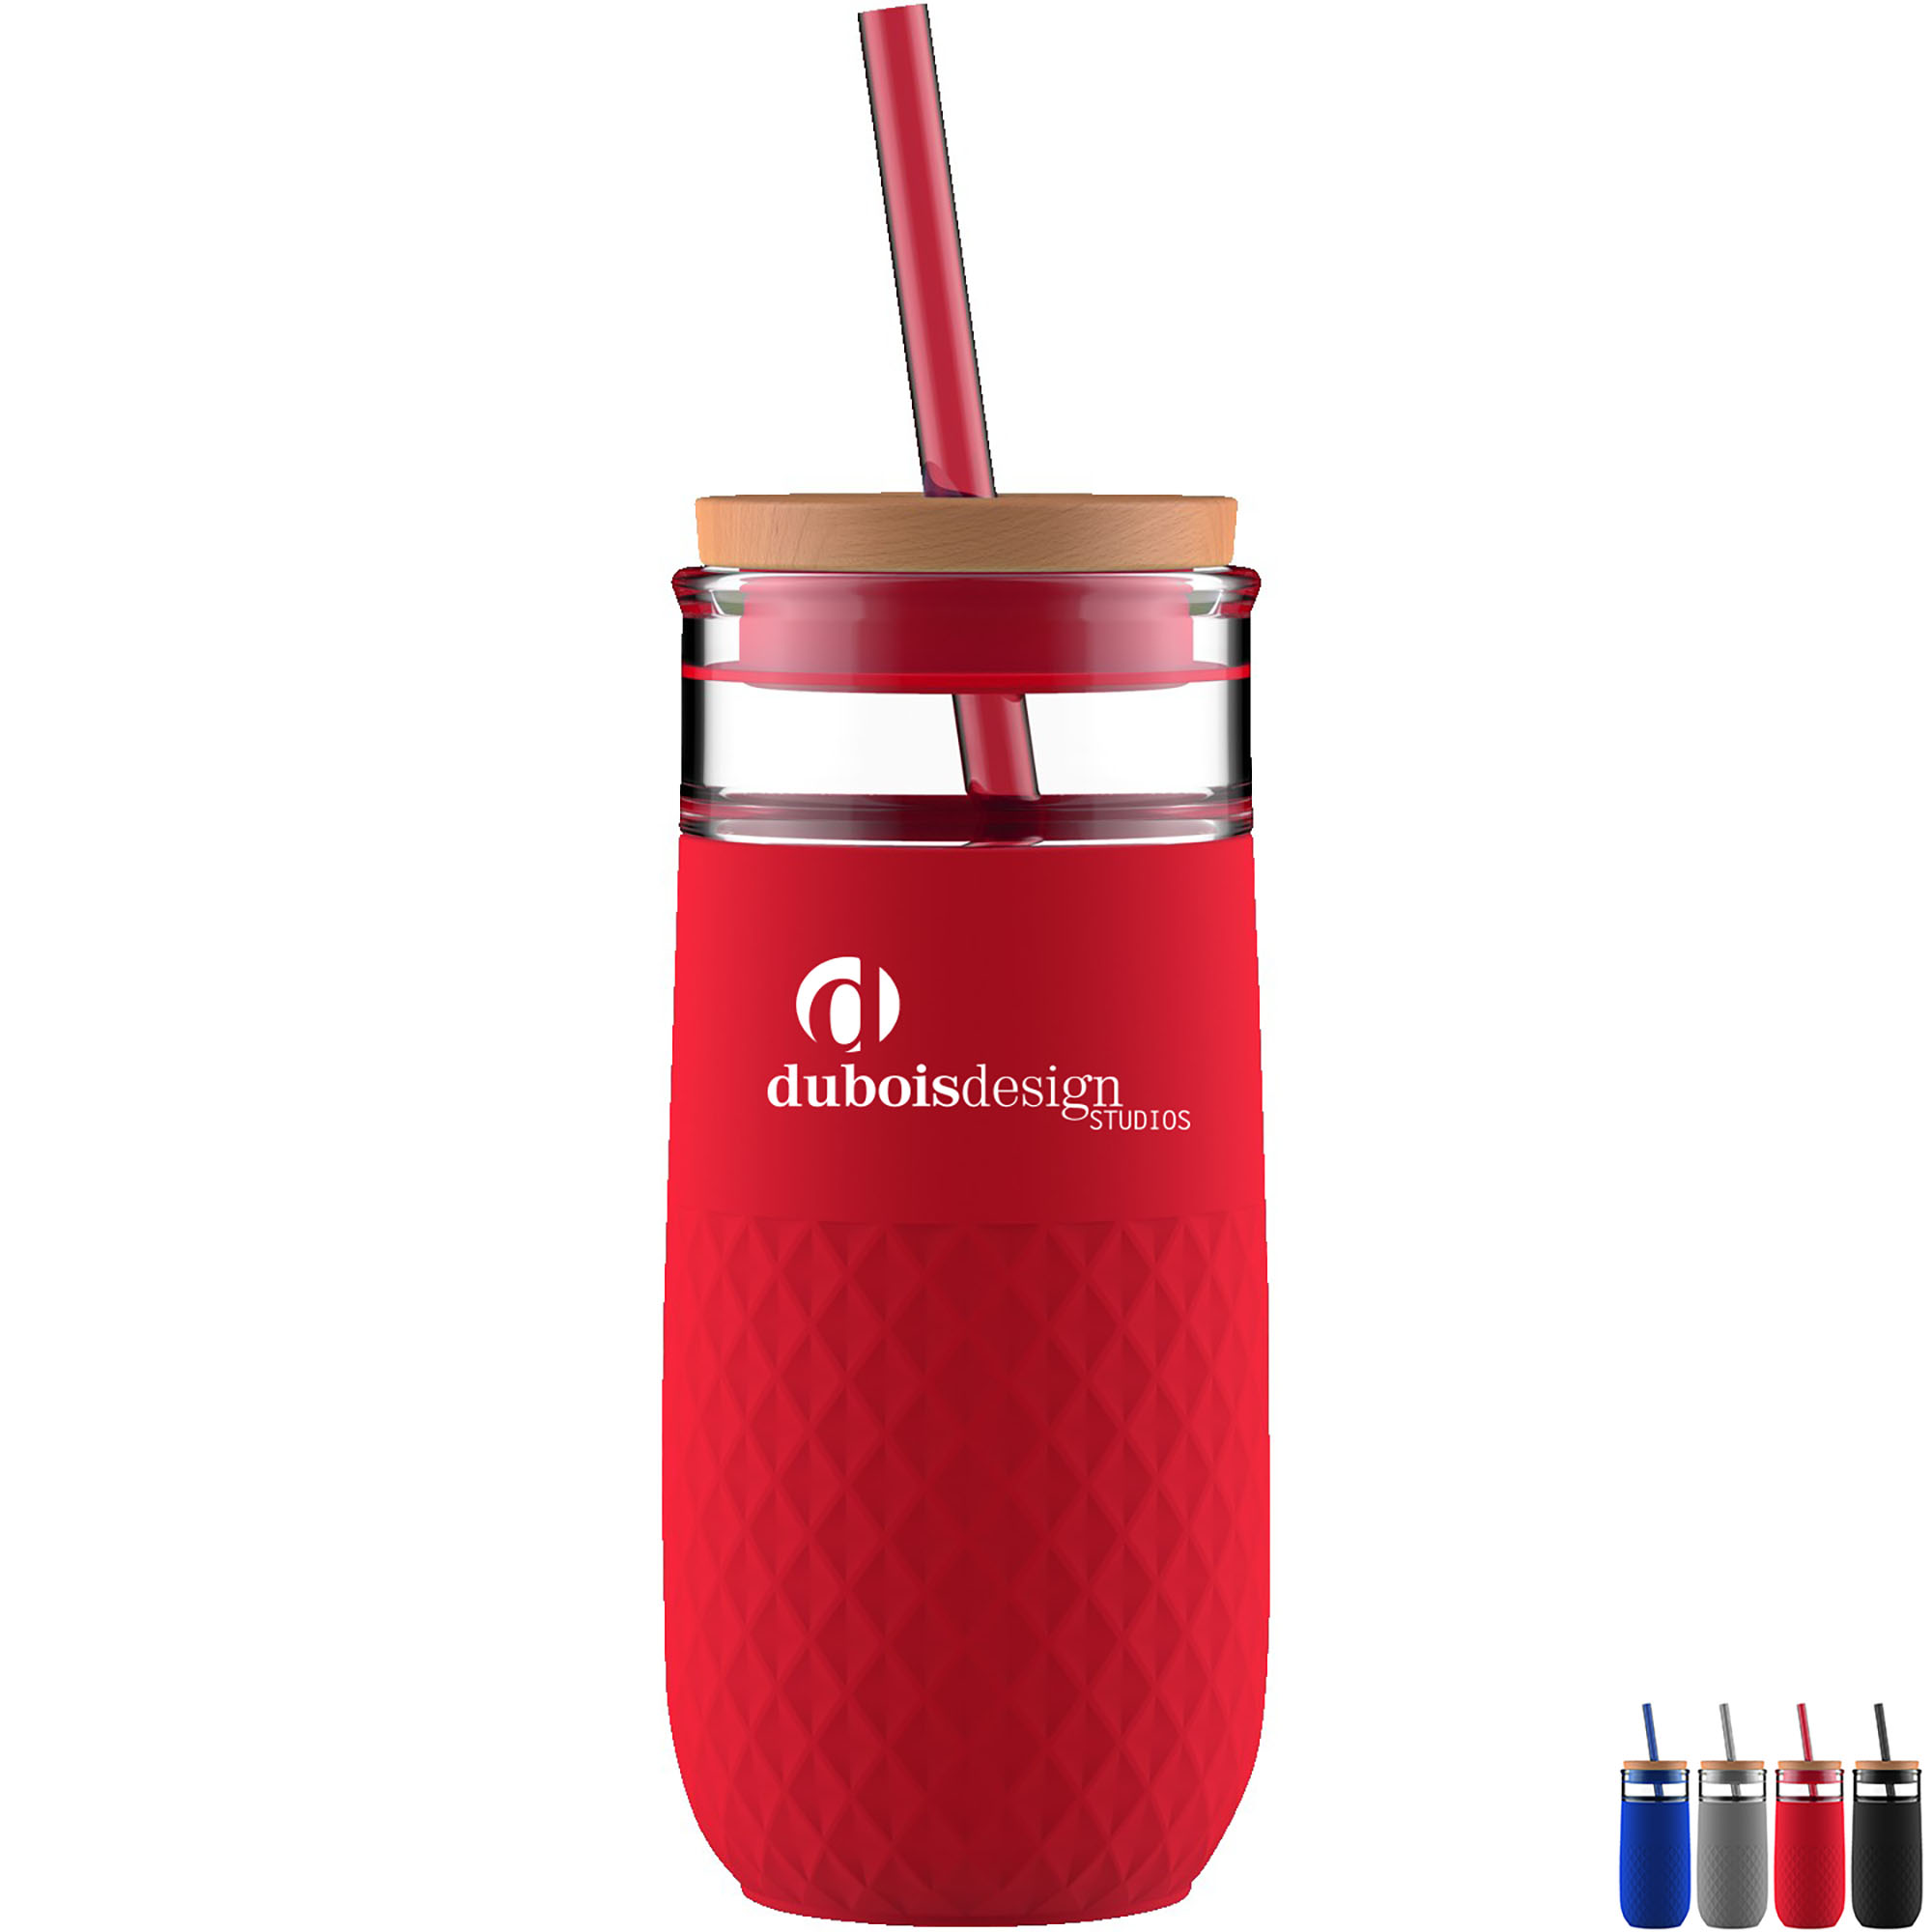 Promotional 18 oz. Ello® Riley Vacuum Stainless Water Bottle